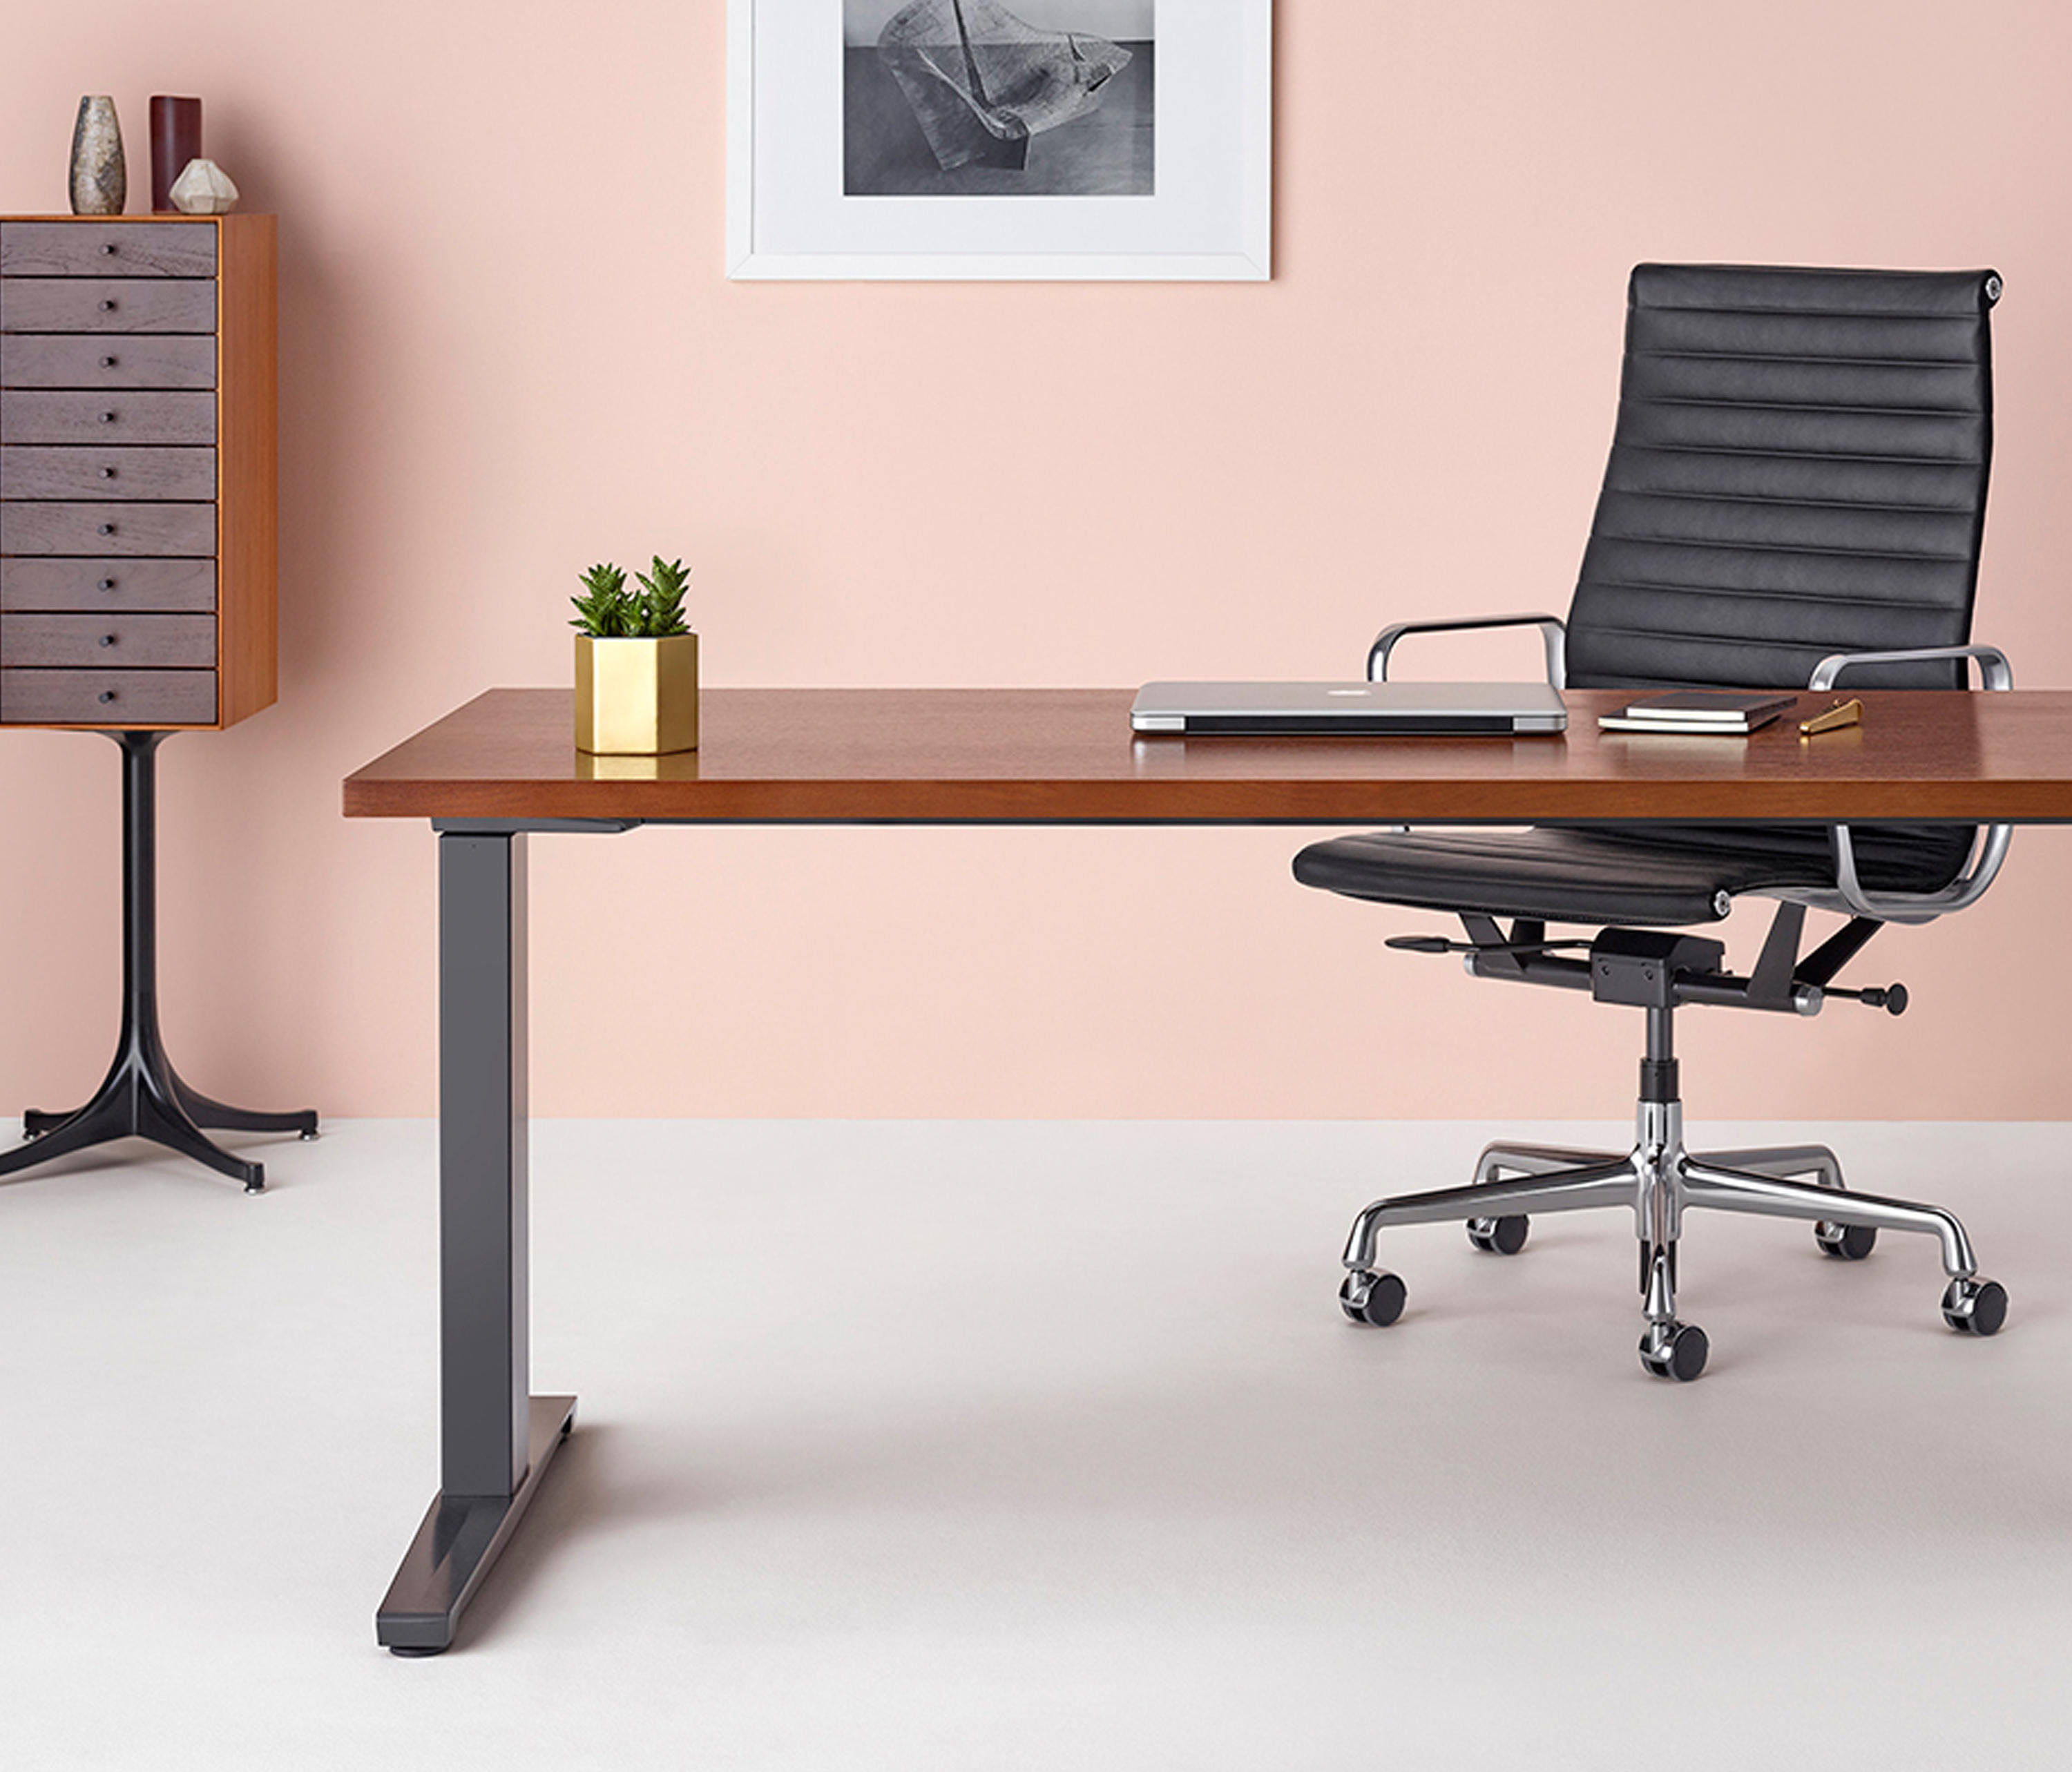 RENEW - Contract tables from Herman Miller | Architonic